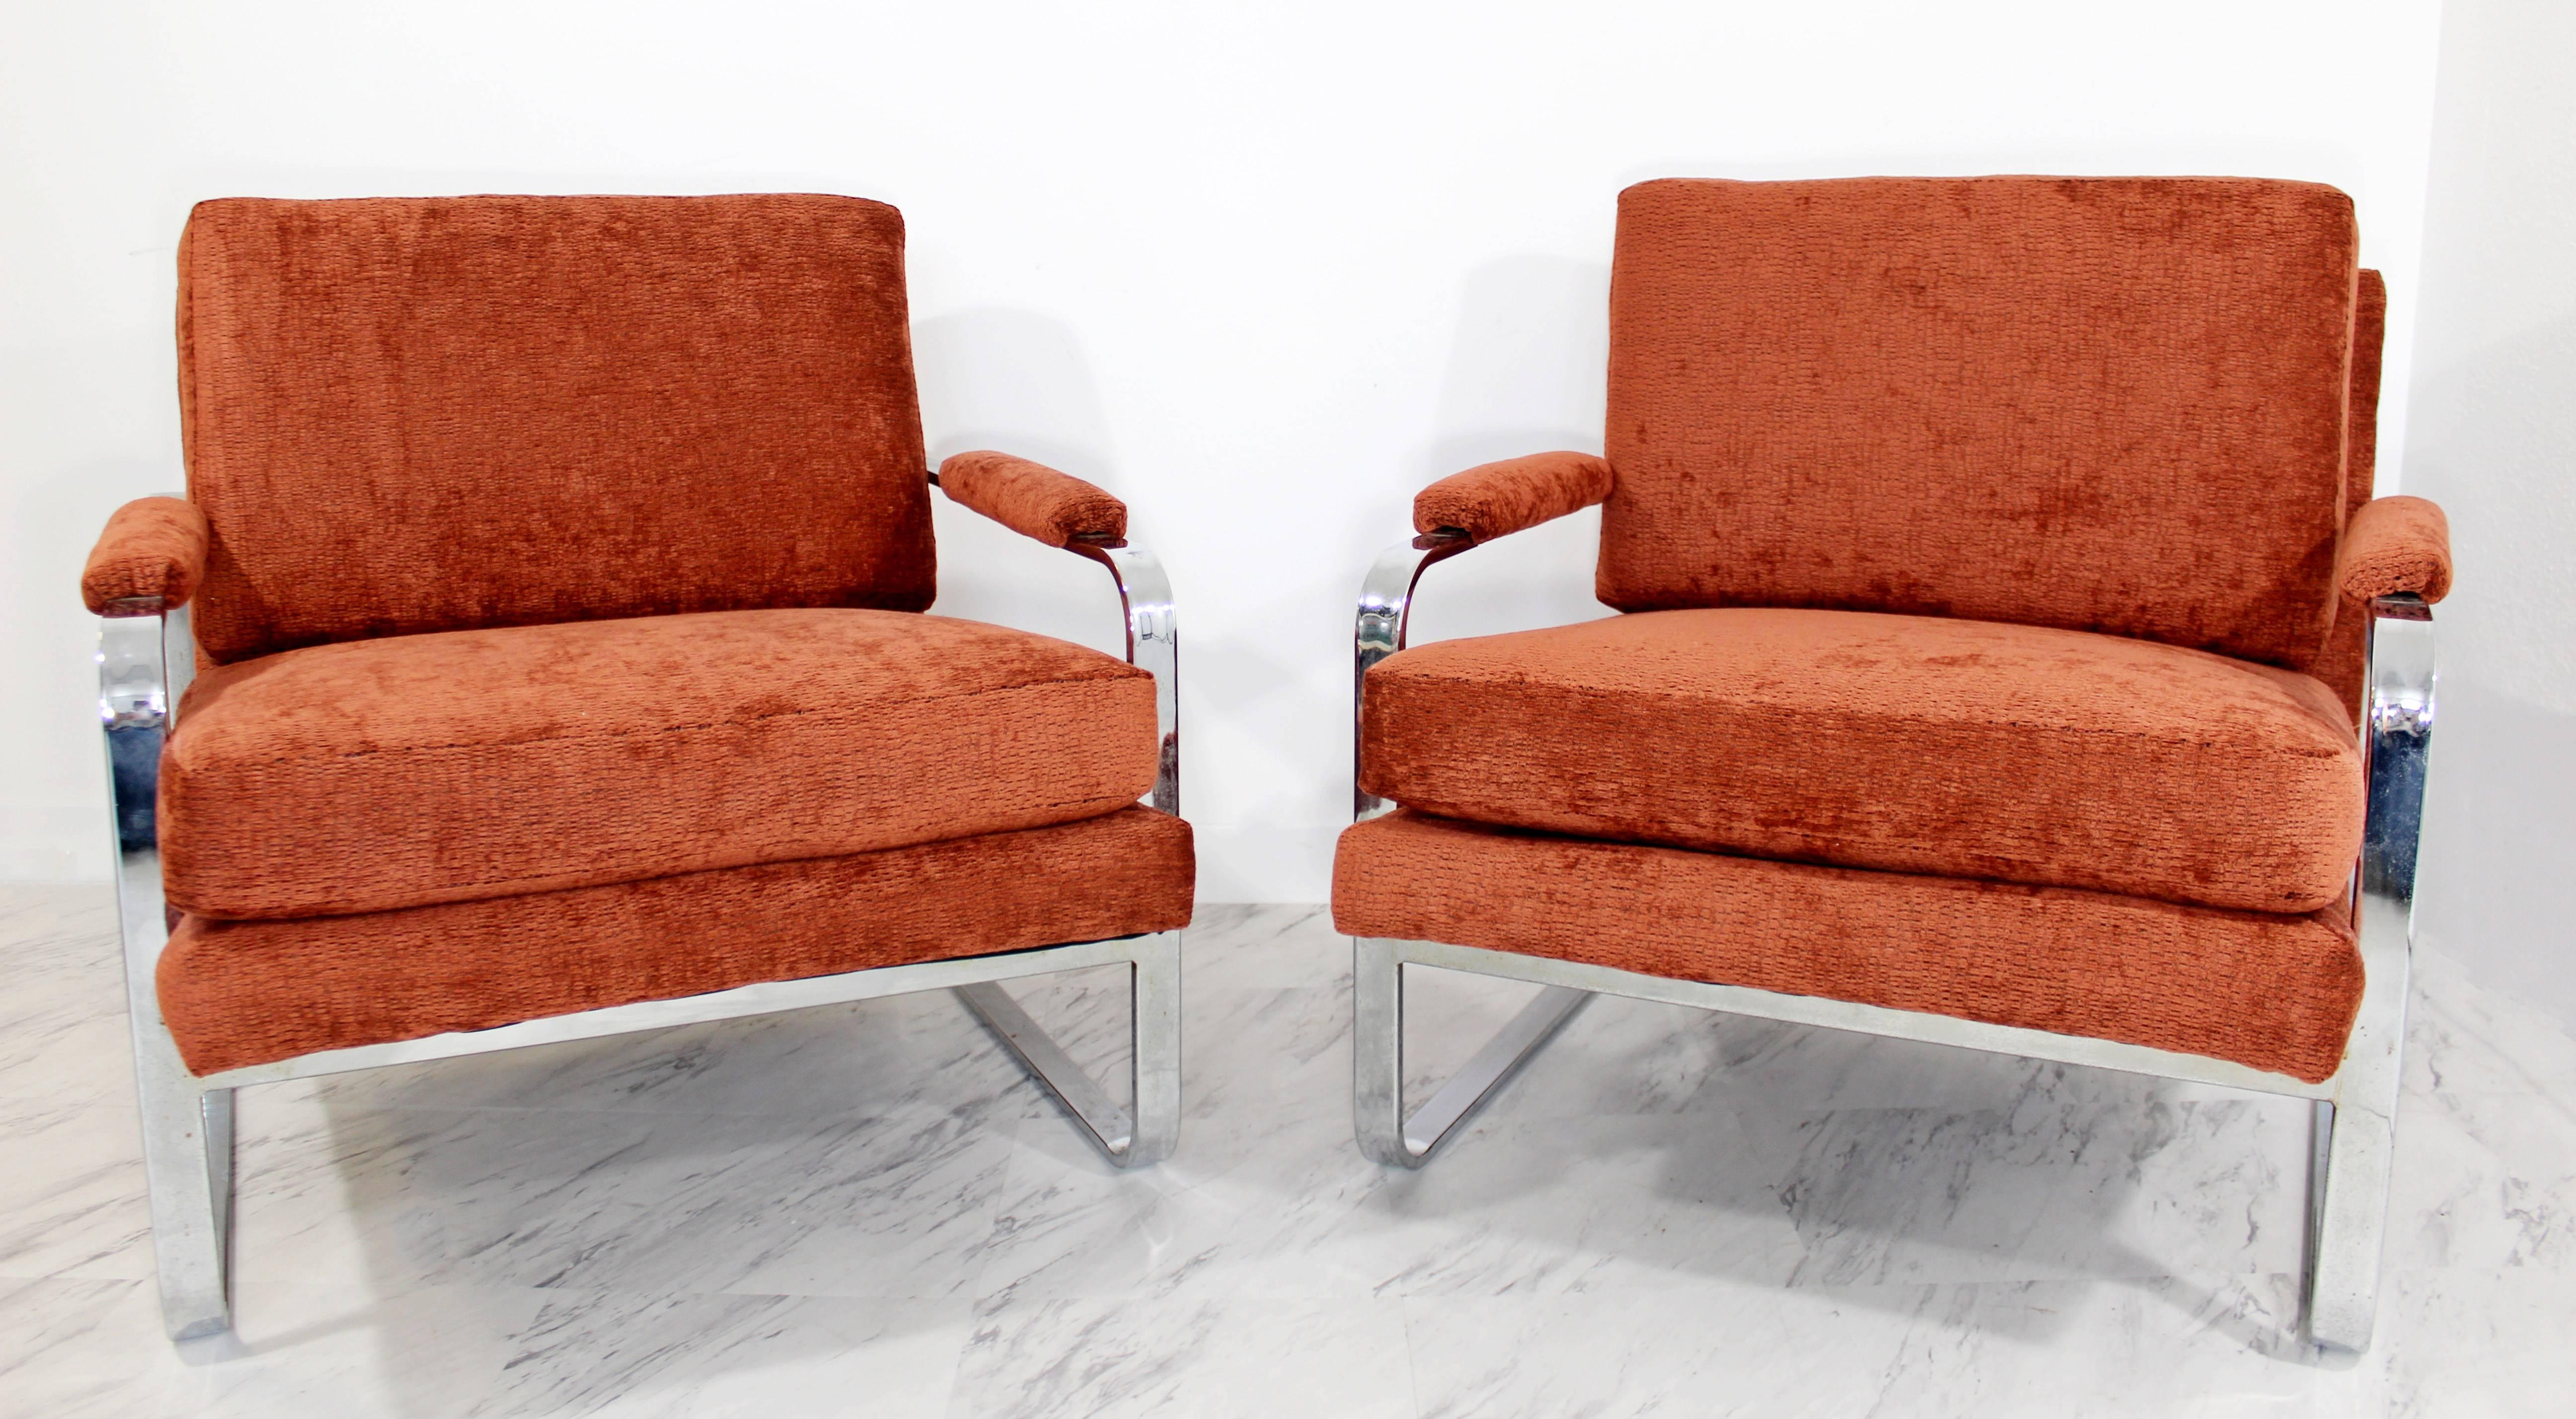 
For your consideration is a fabulous pair of flat bar chrome lounge chairs with a maroon and coral chenille upholstery. Professionally reupholstered and in excellent condition. Chrome is also in excellent condition. The dimensions are 30